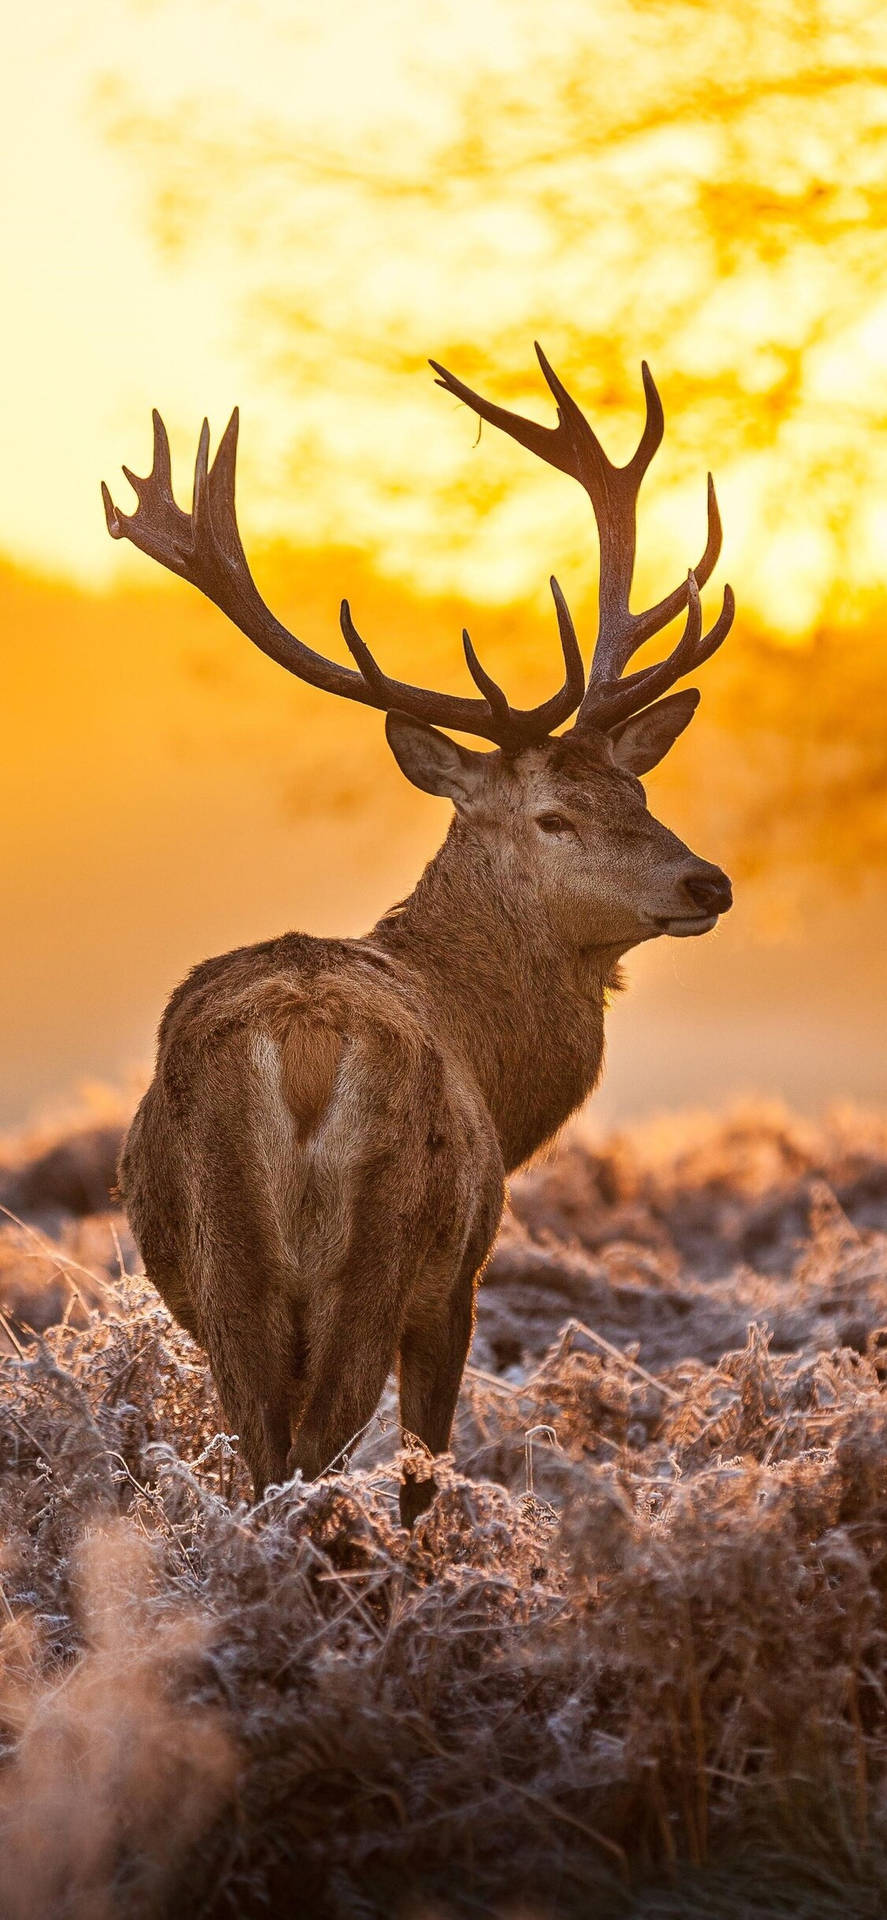 Get Your Nature Fix Every Day with a Deer iPhone Wallpaper